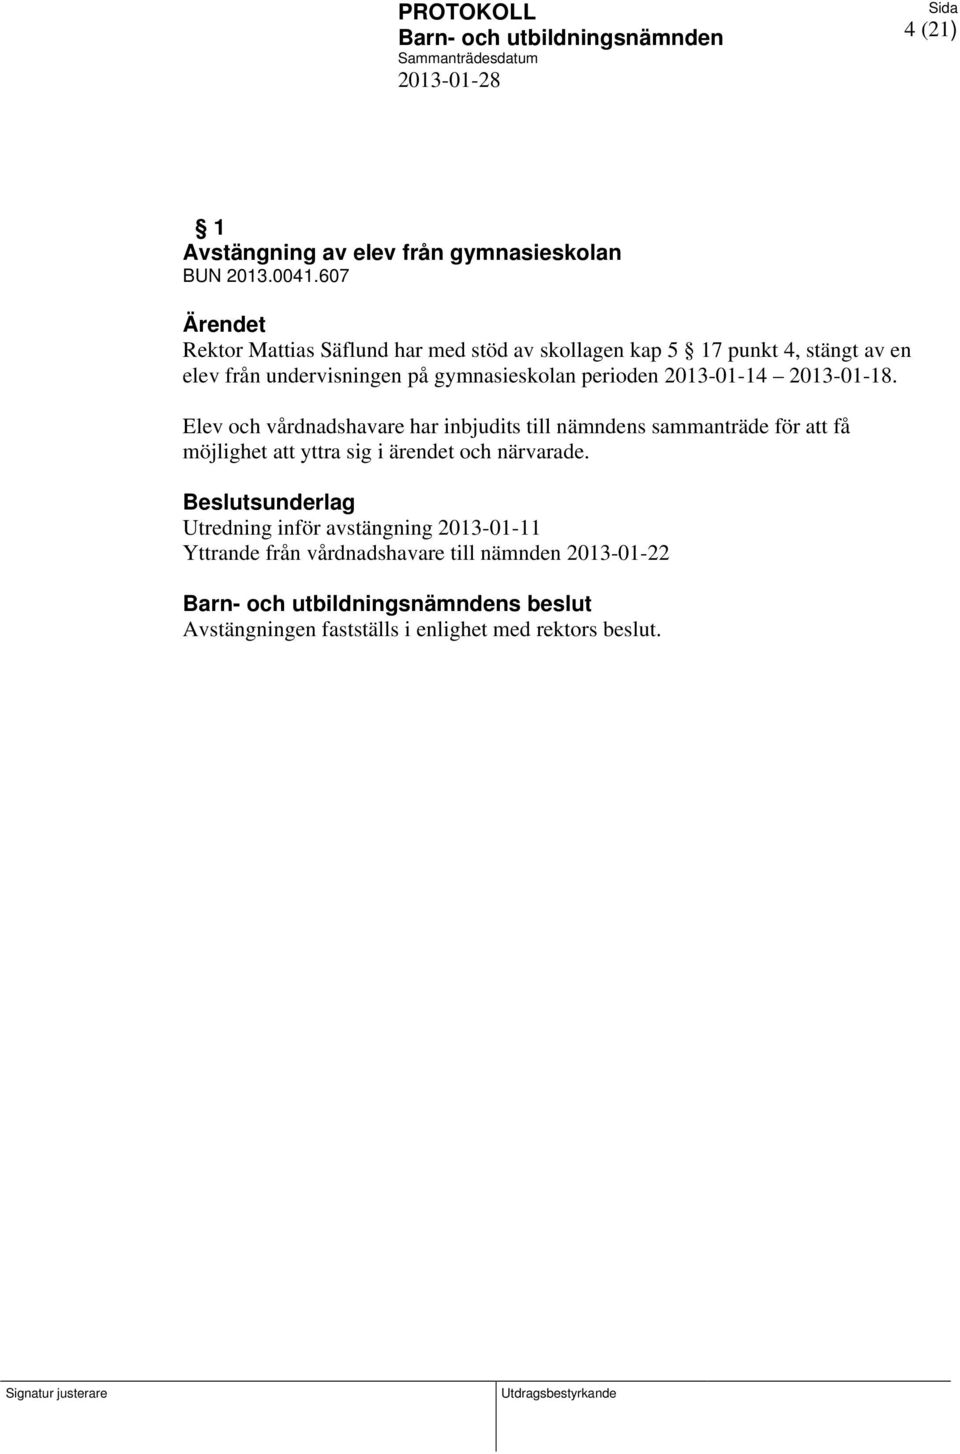 perioden 2013-01-14 2013-01-18.